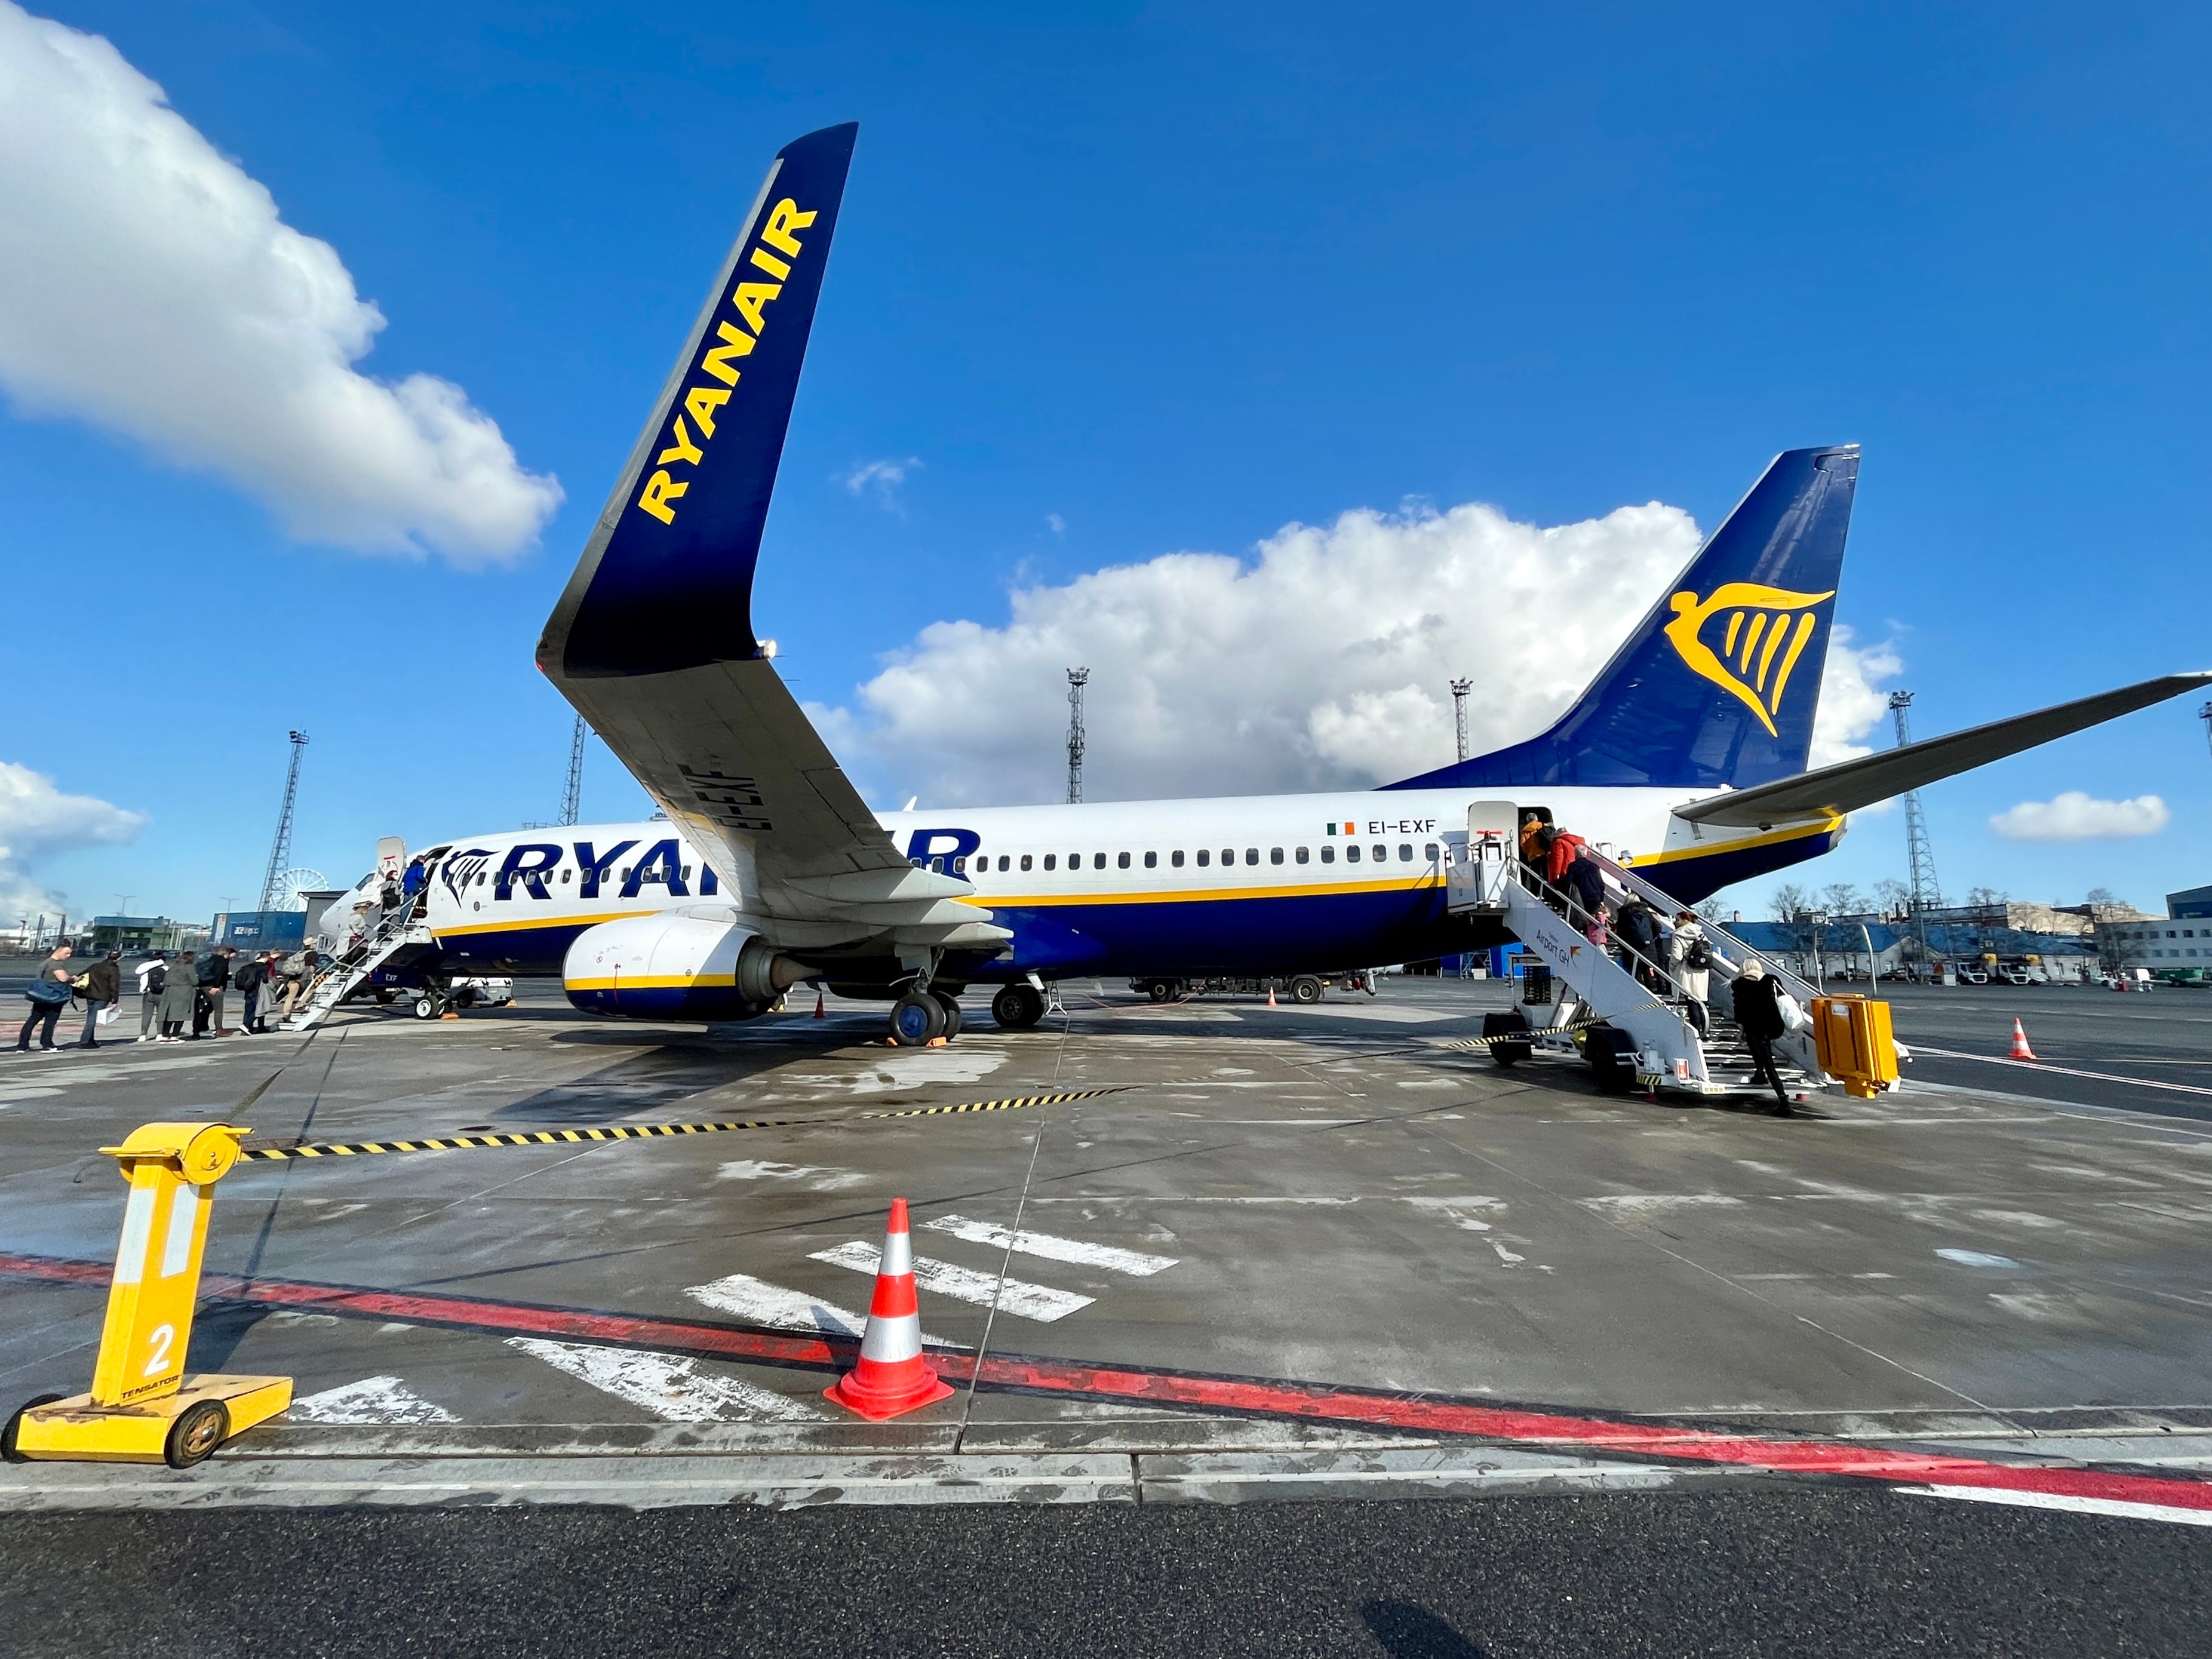 Boarding soon? Ryanair has denied boarding to thousands of passengers after setting its own rules about passport validity